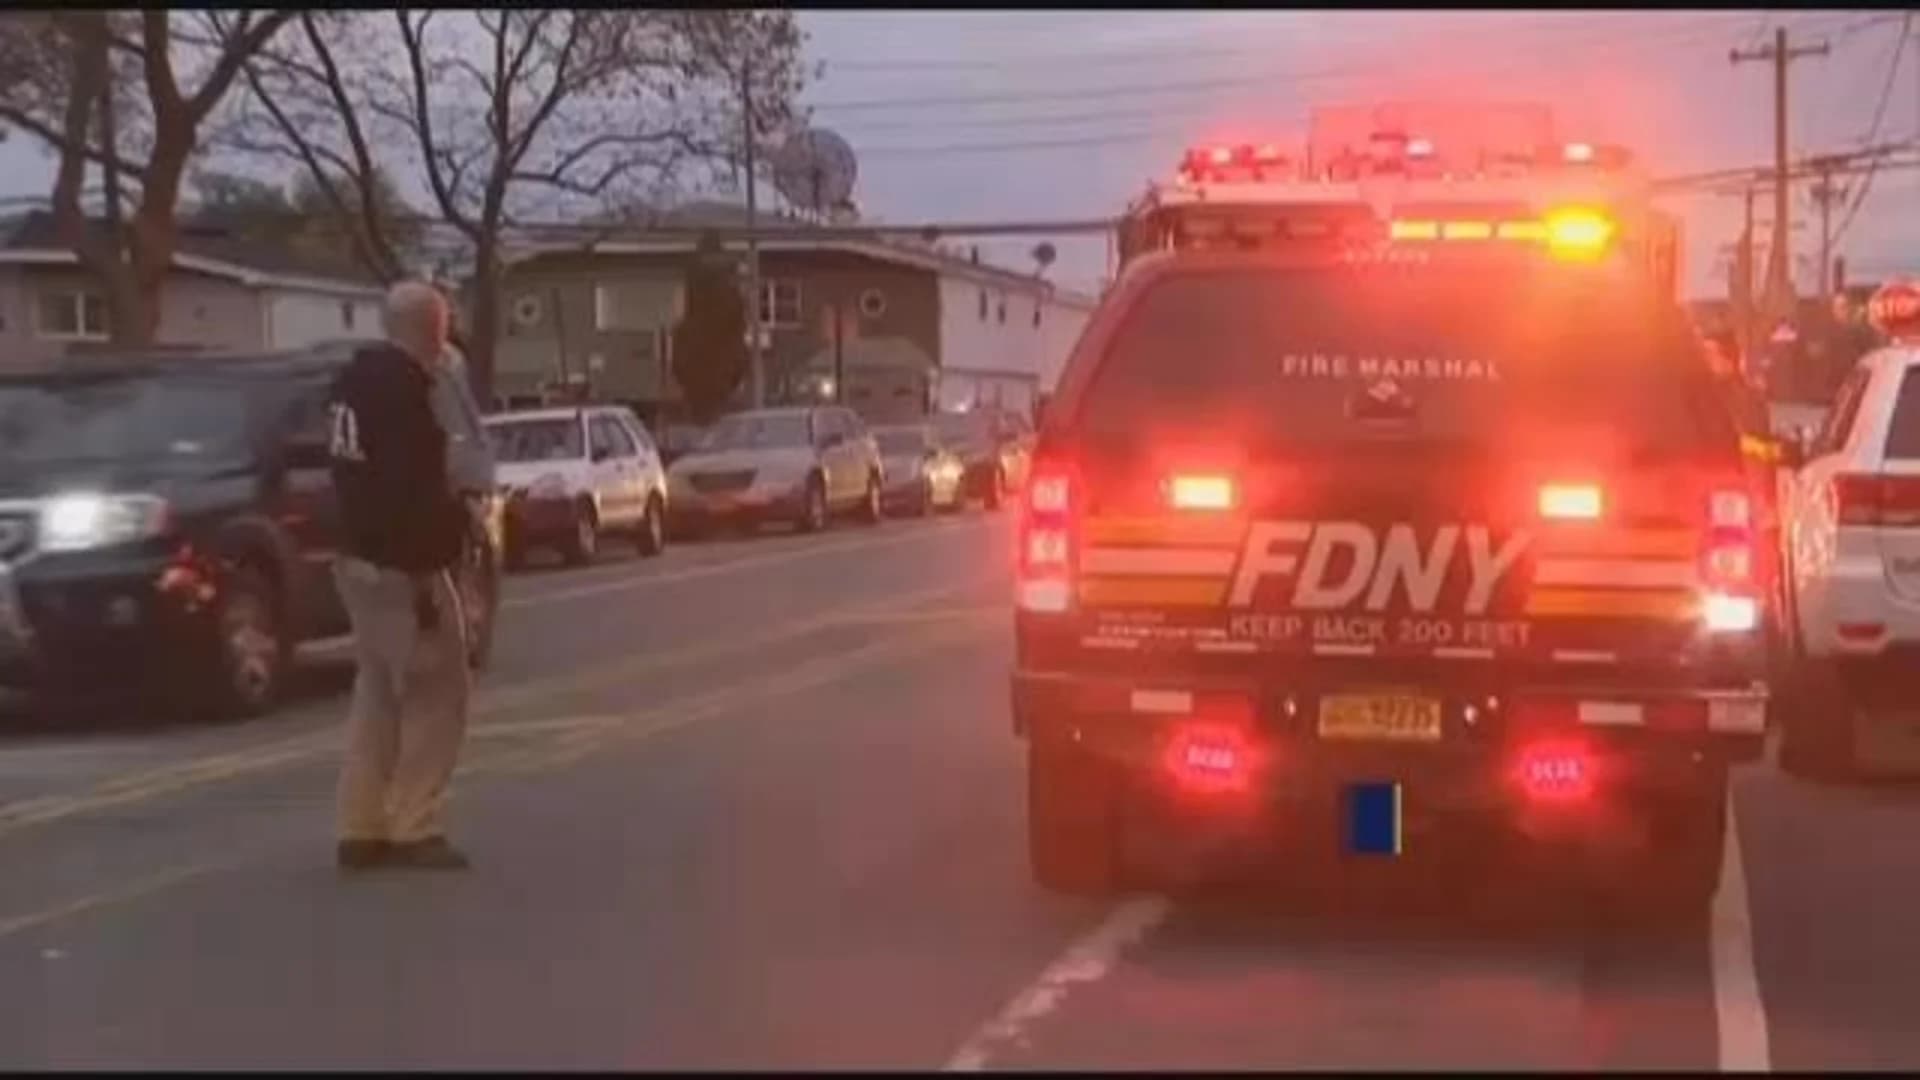 2 injured in early morning East New York fire deemed possibly suspicious